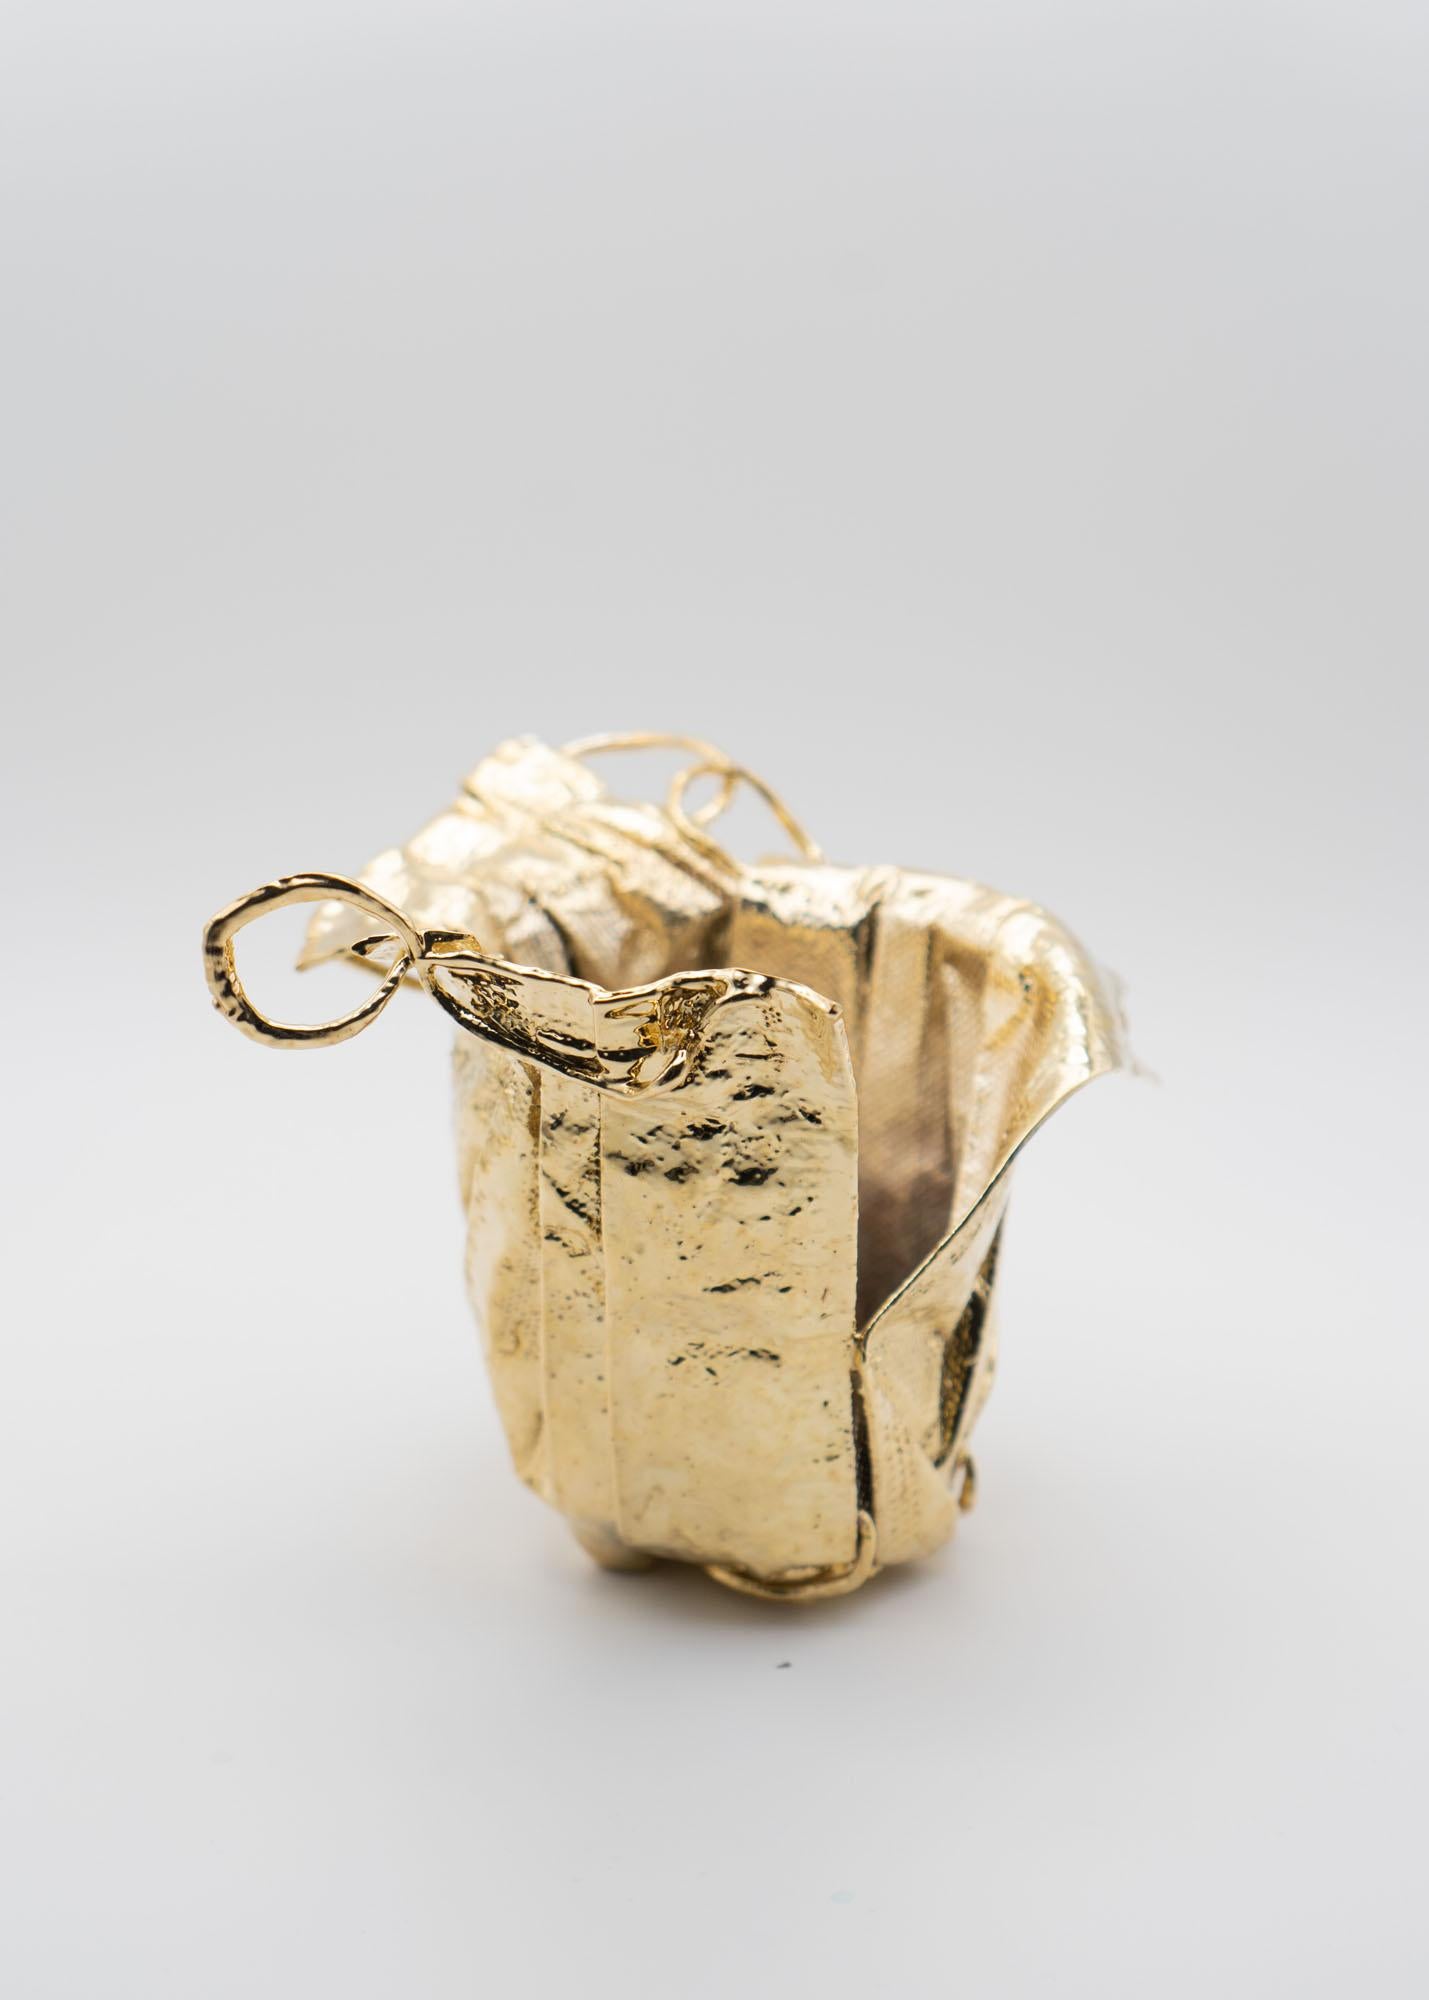 Post-Modern Remask Act 015 Gold Art Object Made from Surgical Mask by Enrico Girotti For Sale